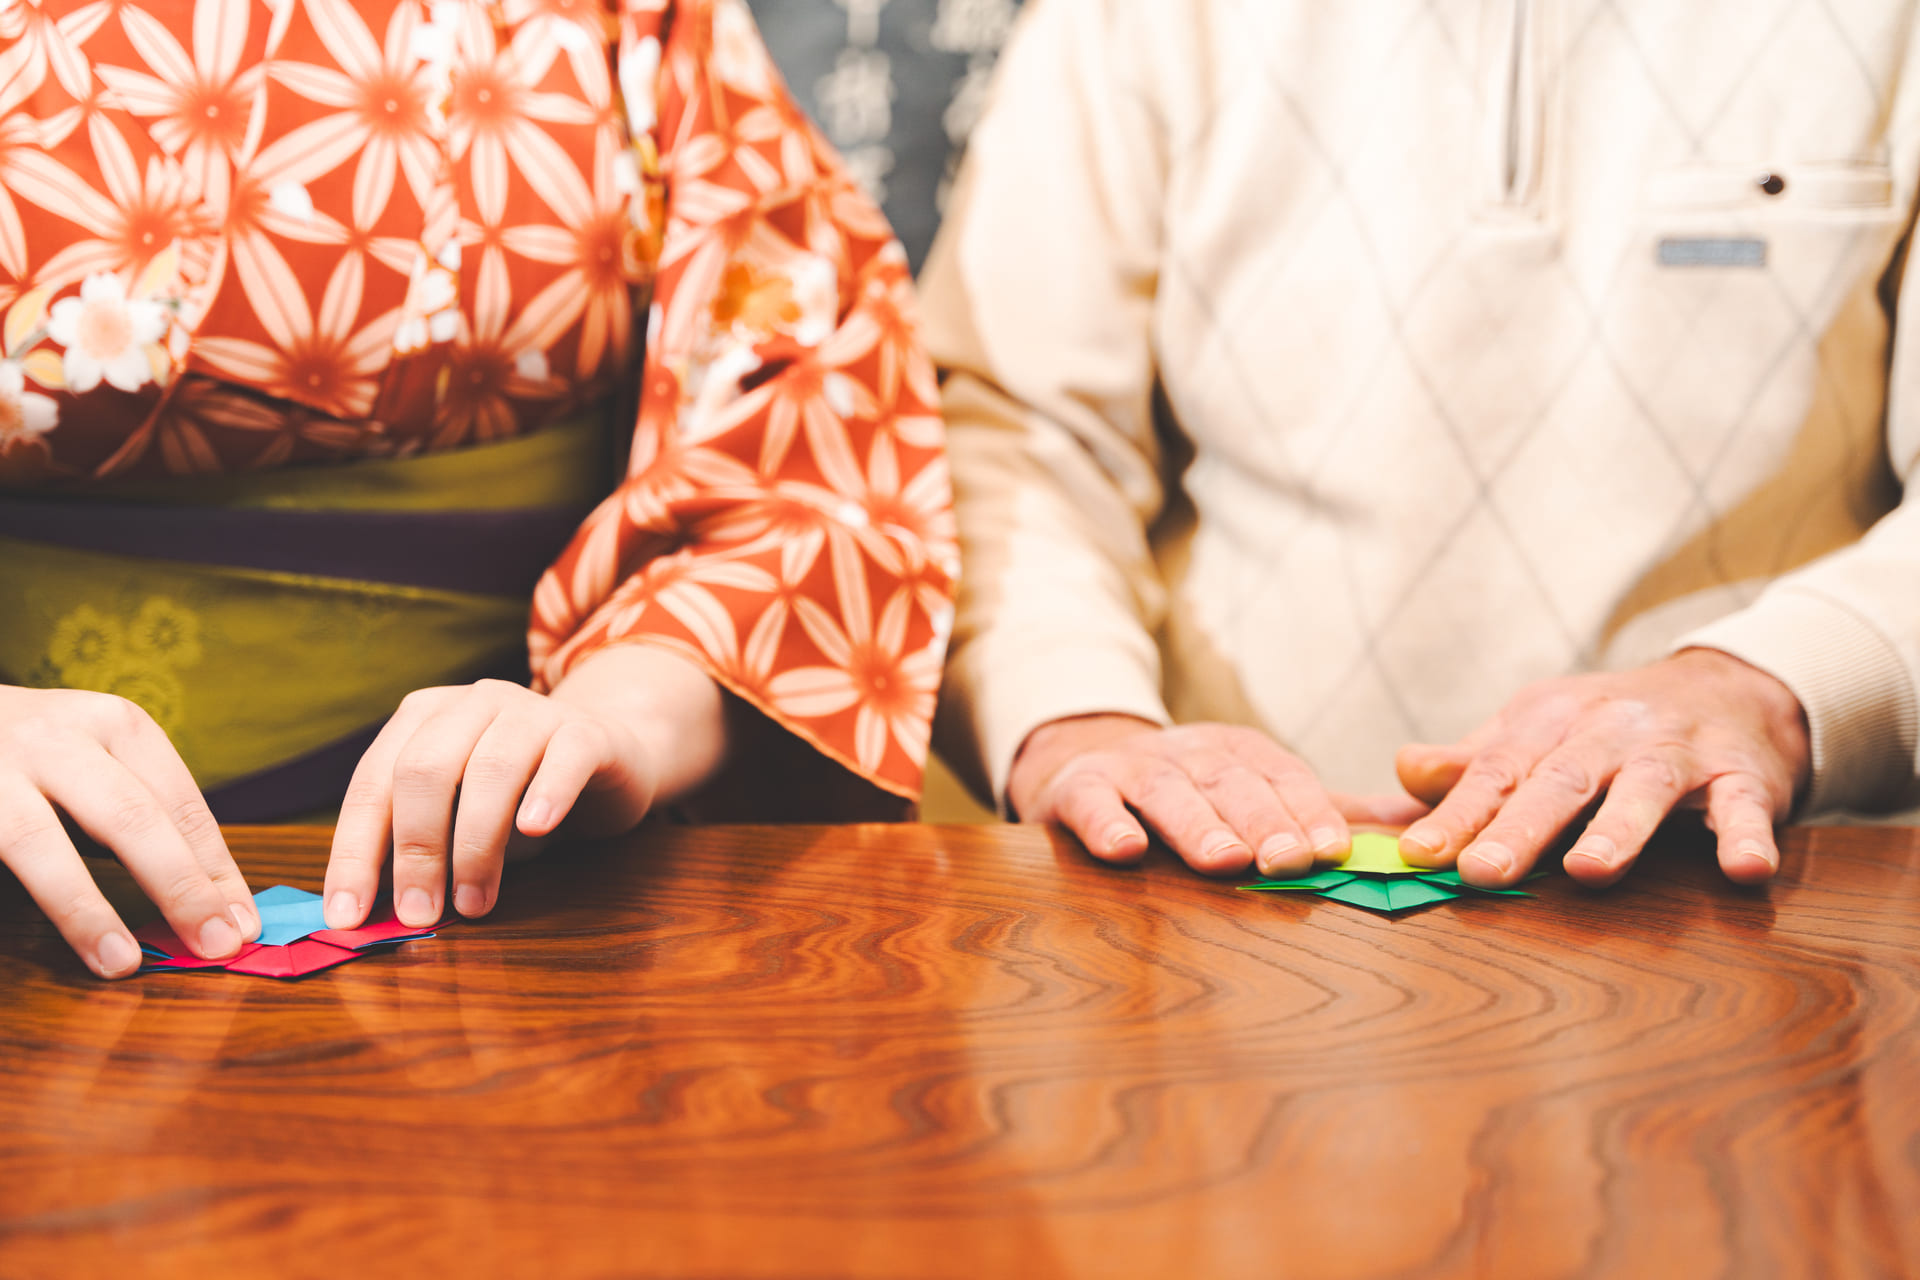 Japanese Cultural Experiences at Kyoto Abeya. The hands of a woman in a kimono and a man in a sweater folding a red and a green piece of origami paper on a wooden table, with a focus on the process of origami folding.